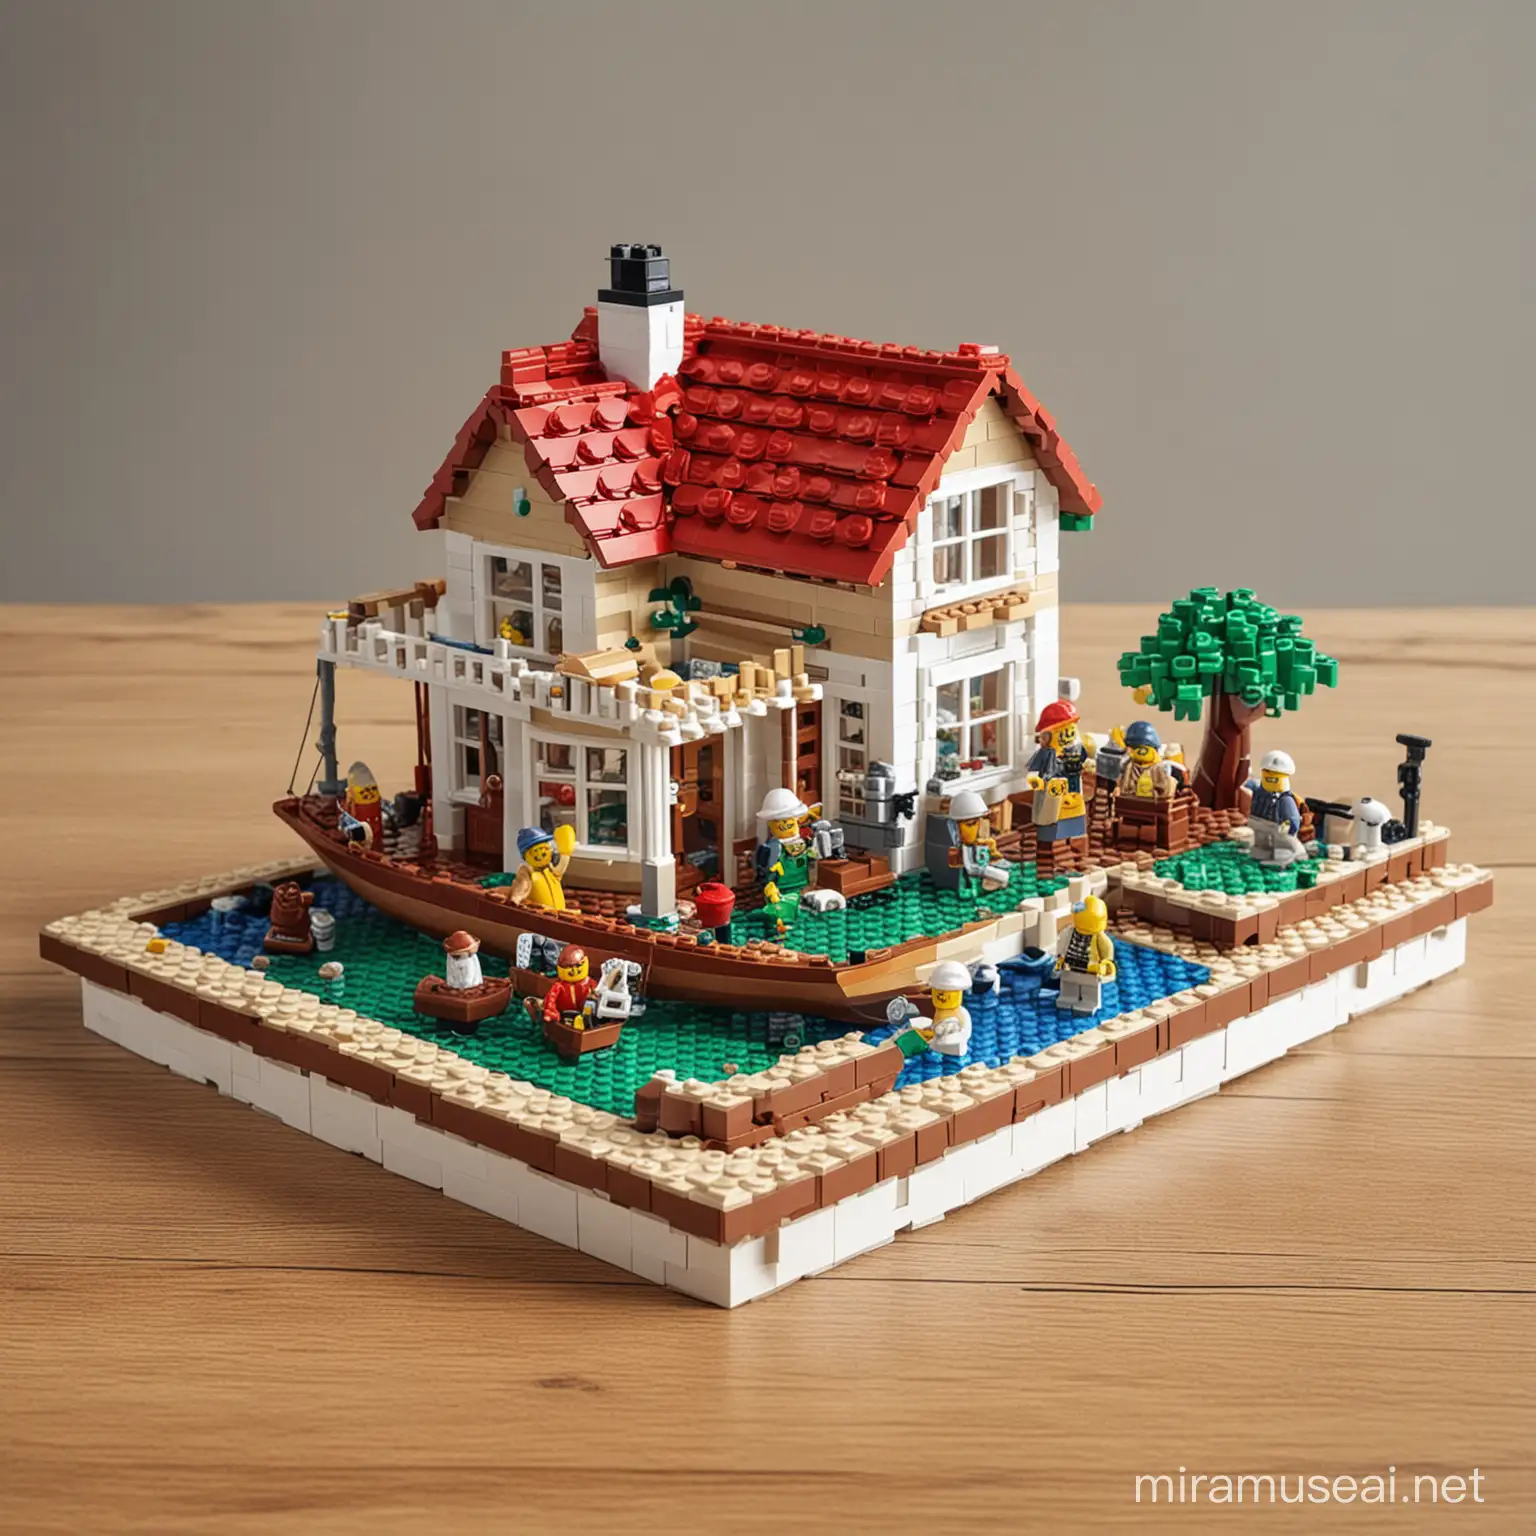 A simple cottage connected to a  boat made of Lego on a table top with a few Lego characters